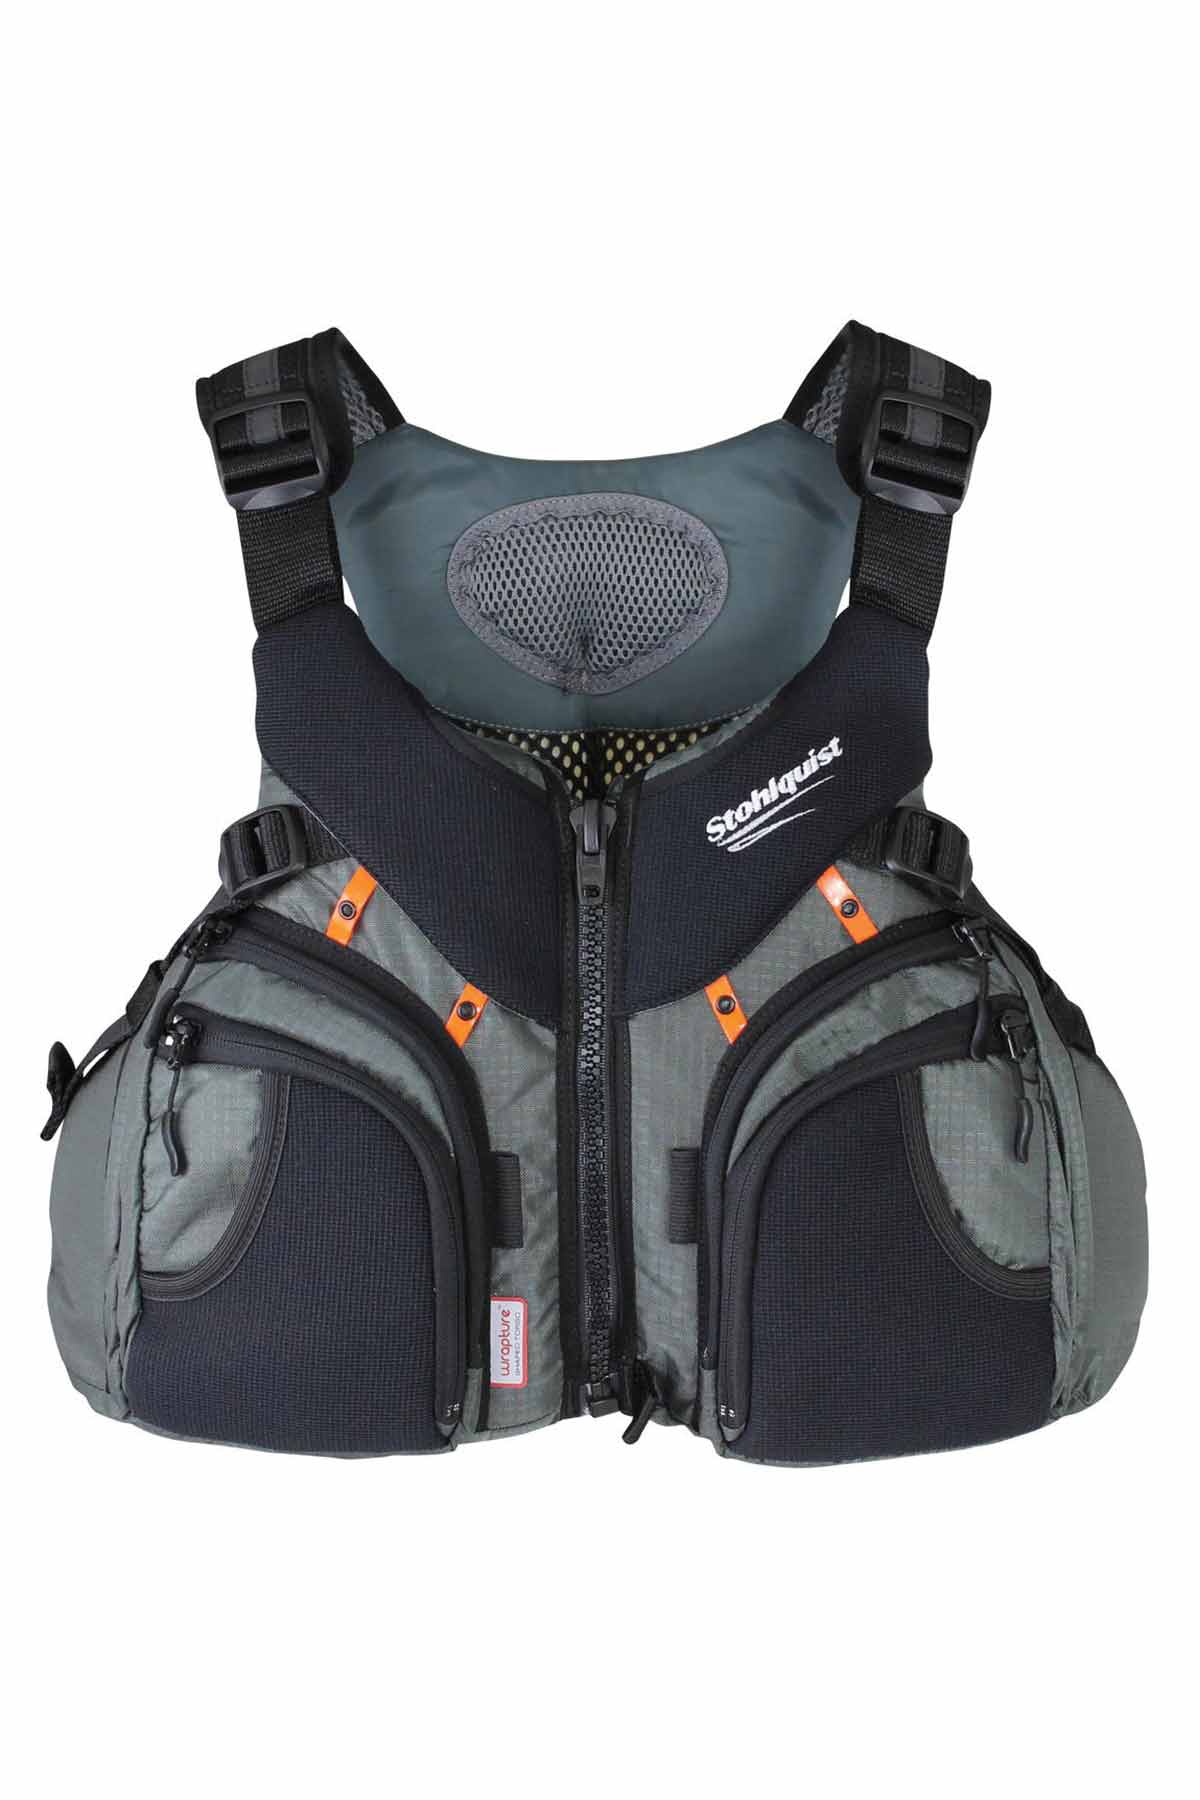 Stohlquist Keeper Gray PFD Front View